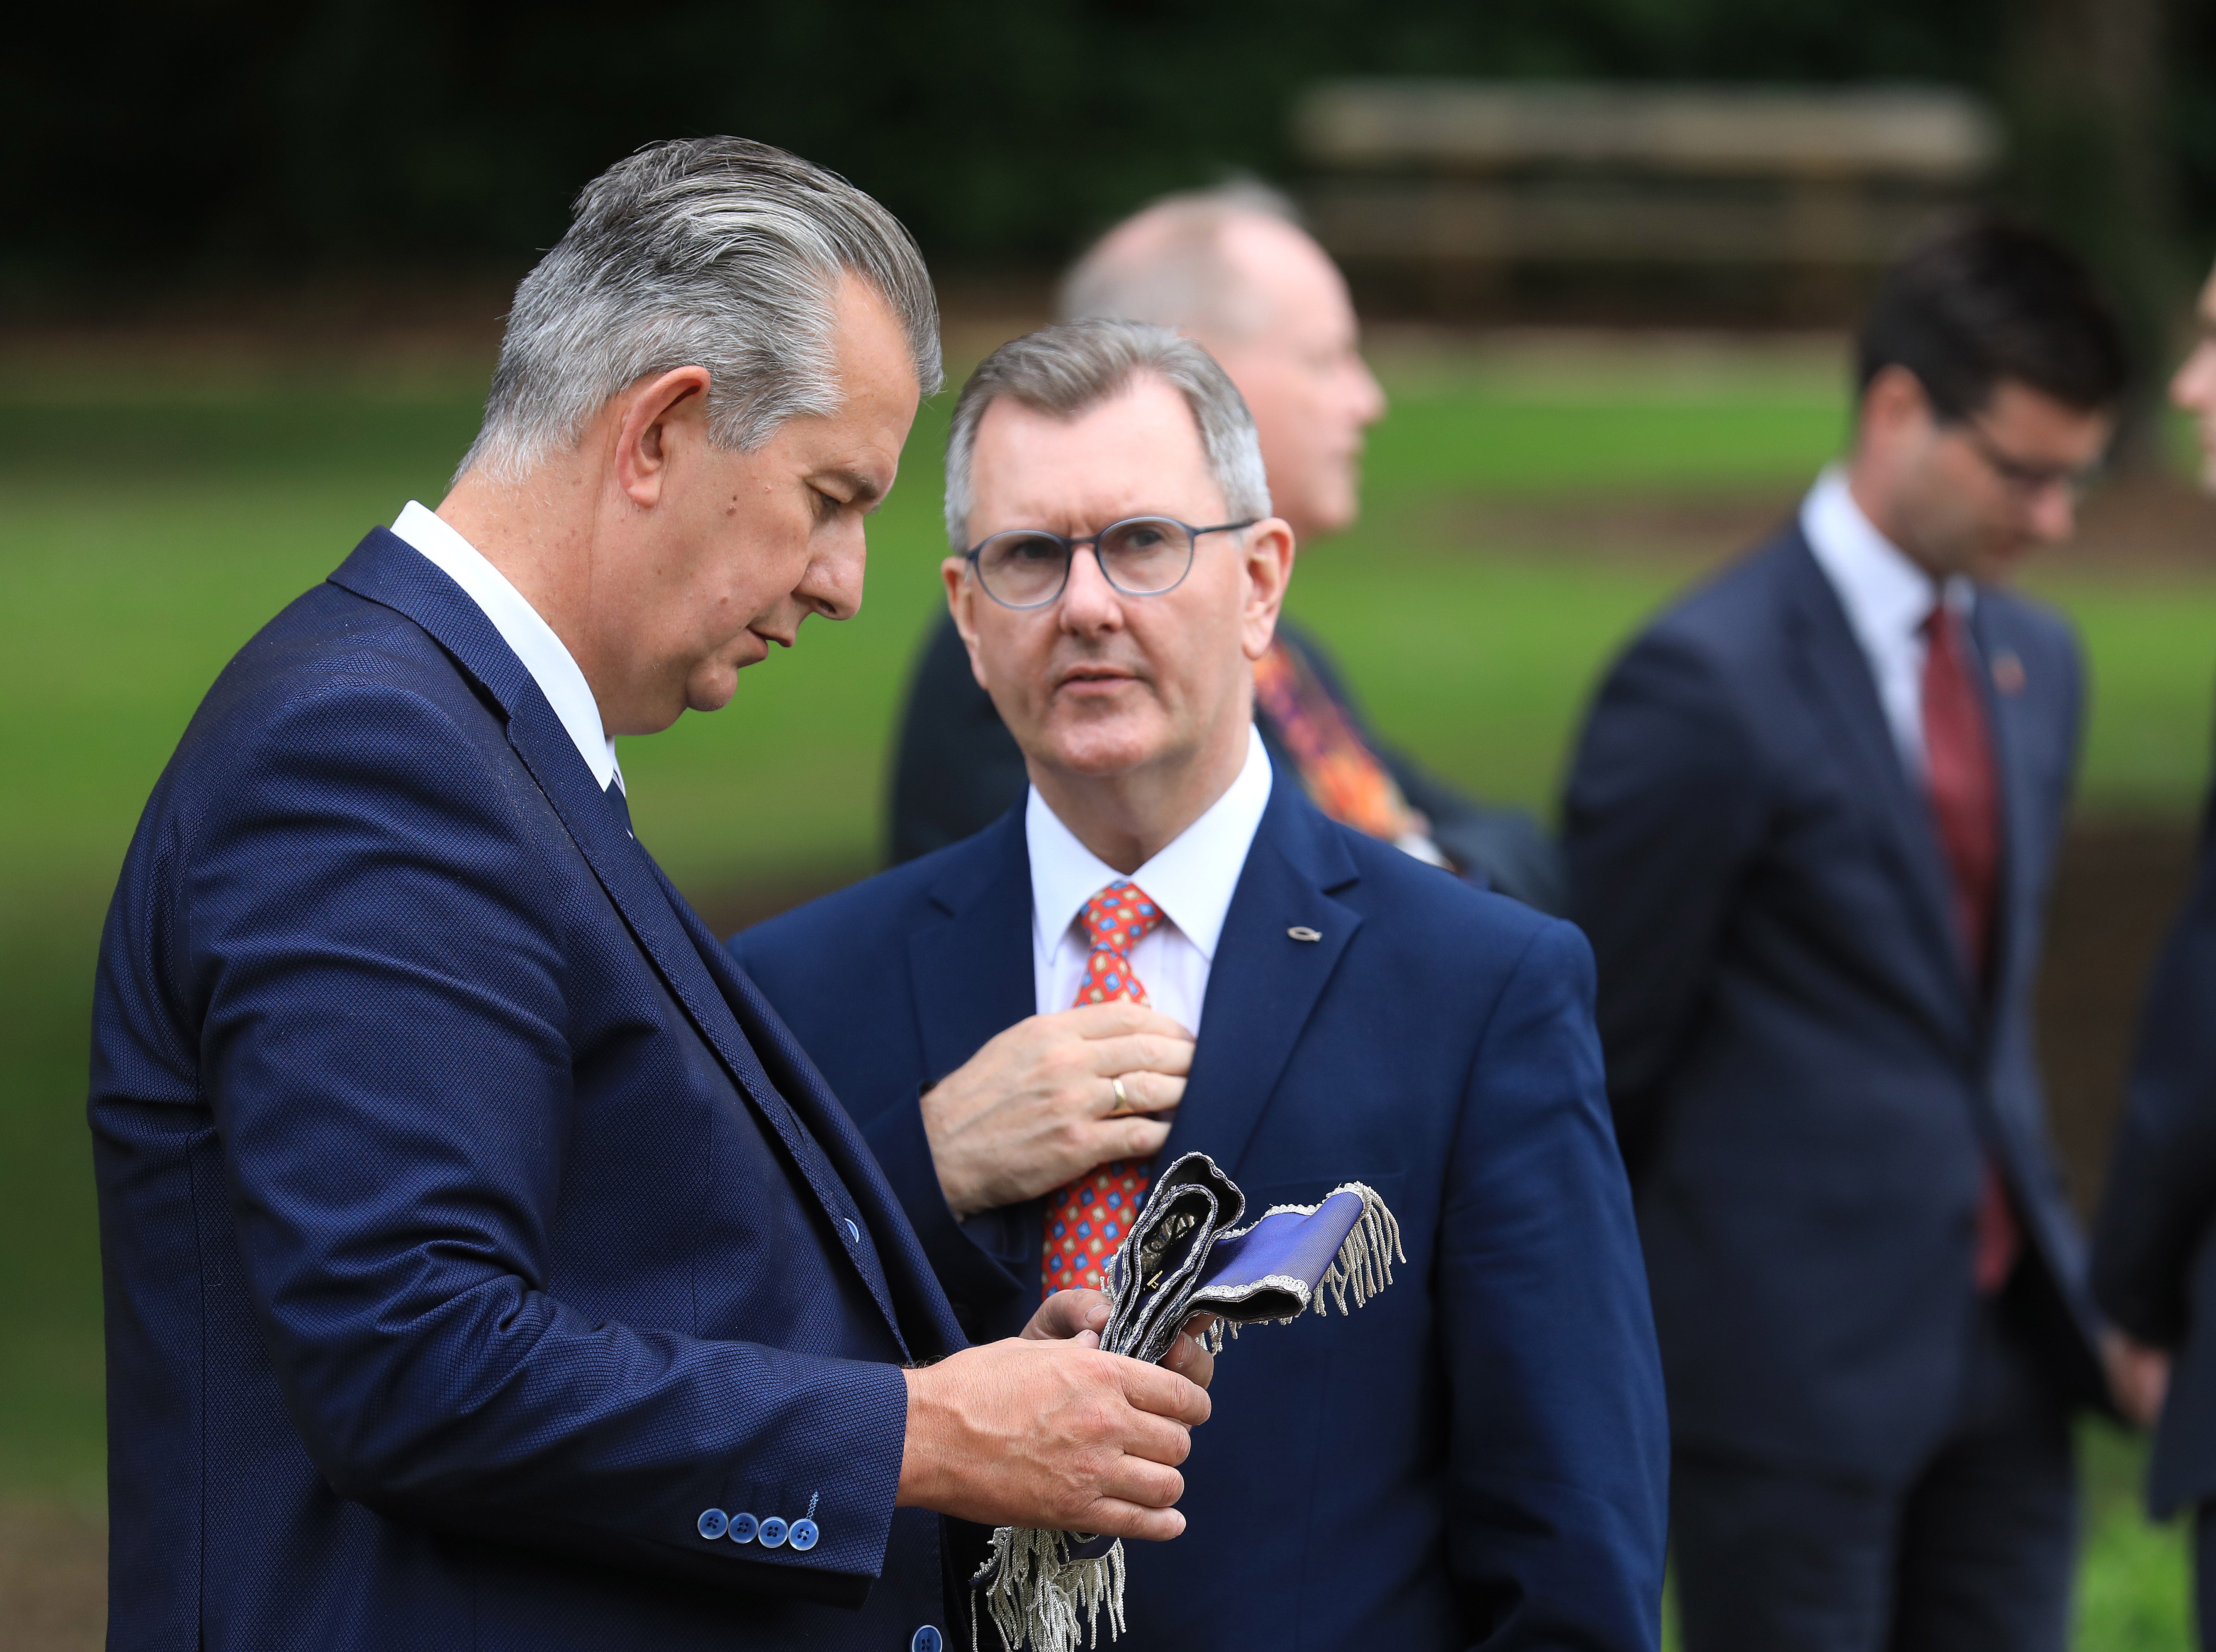 Former Democratic Unionist Party leader Edwin Poots talks with the man who replace him, Sir Jeffrey Donaldson during a Battle of the Somme commemoration (Peter Morrison/PA)